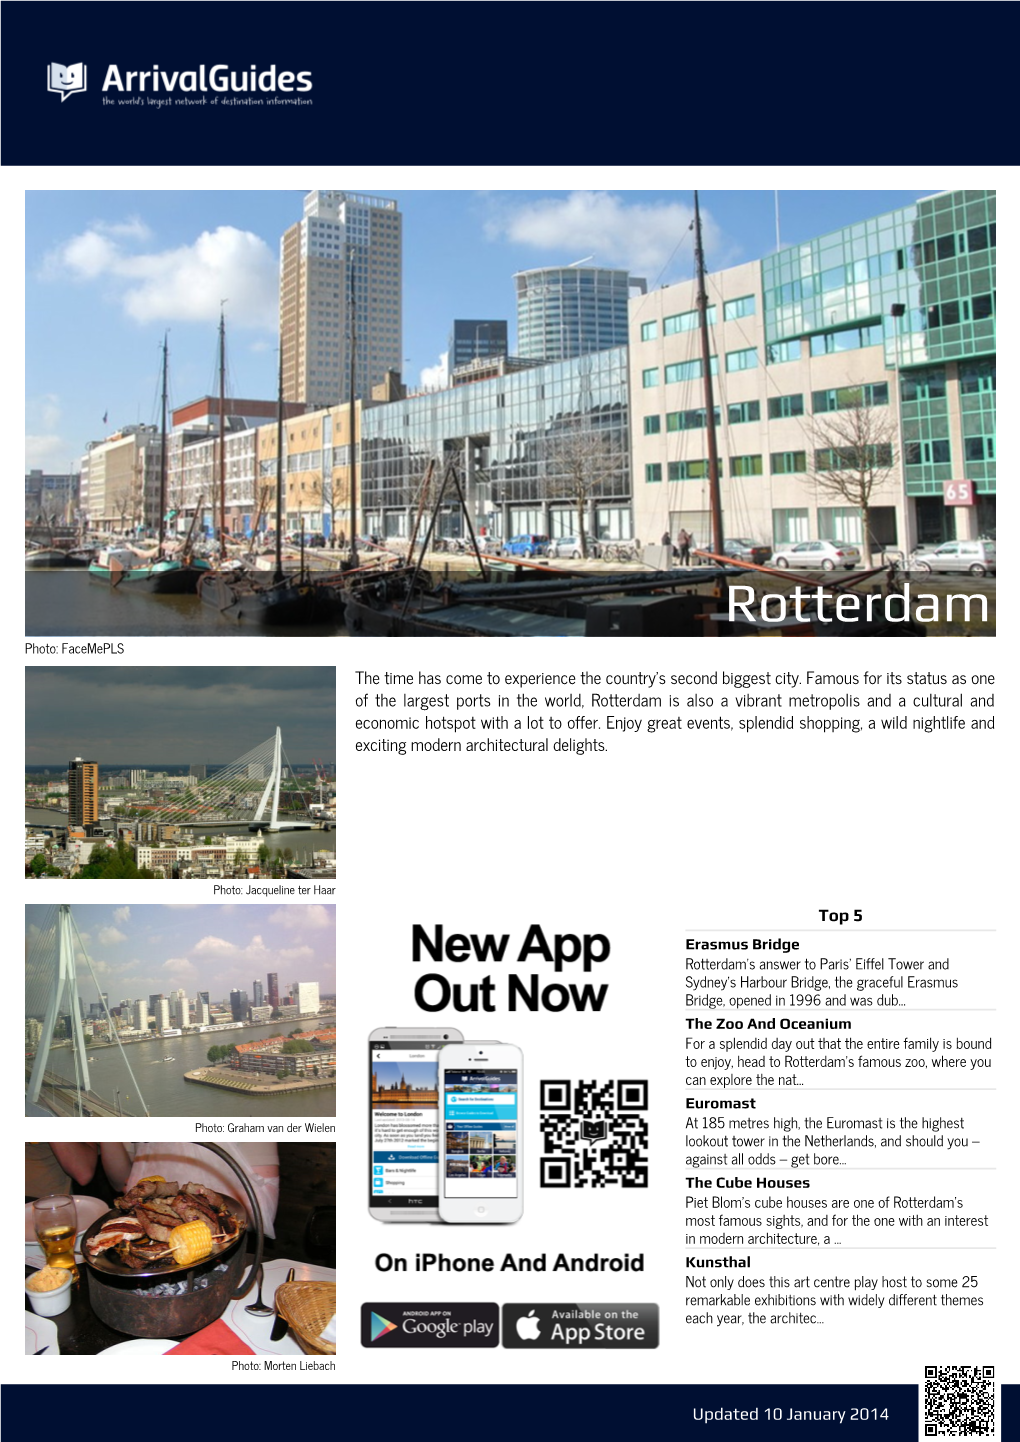 Rotterdam Photo: Facemepls the Time Has Come to Experience the Country’S Second Biggest City